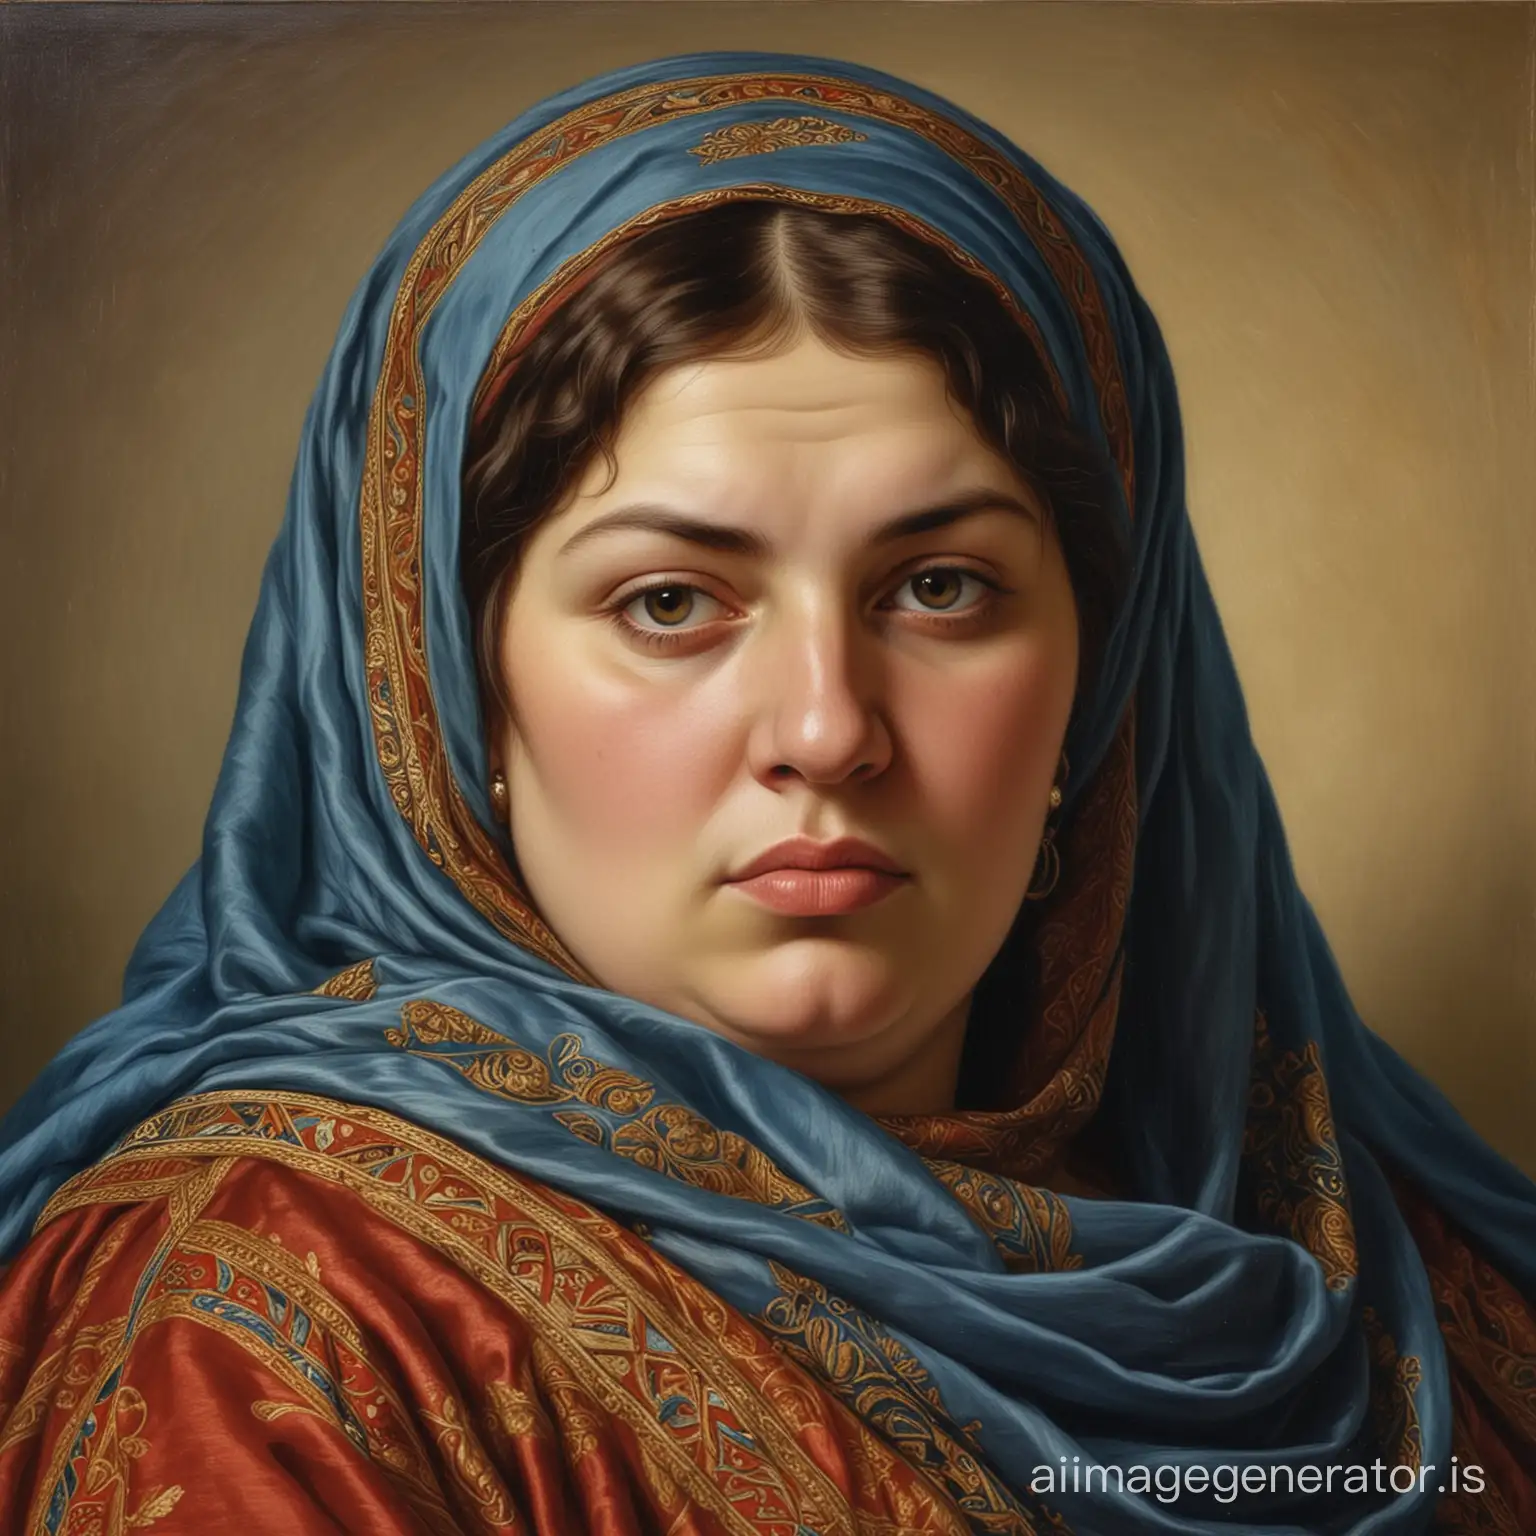 A pre raphaelite oil portrait of an overweight spanish woman living in the early 10th century, she wears a silk hijab